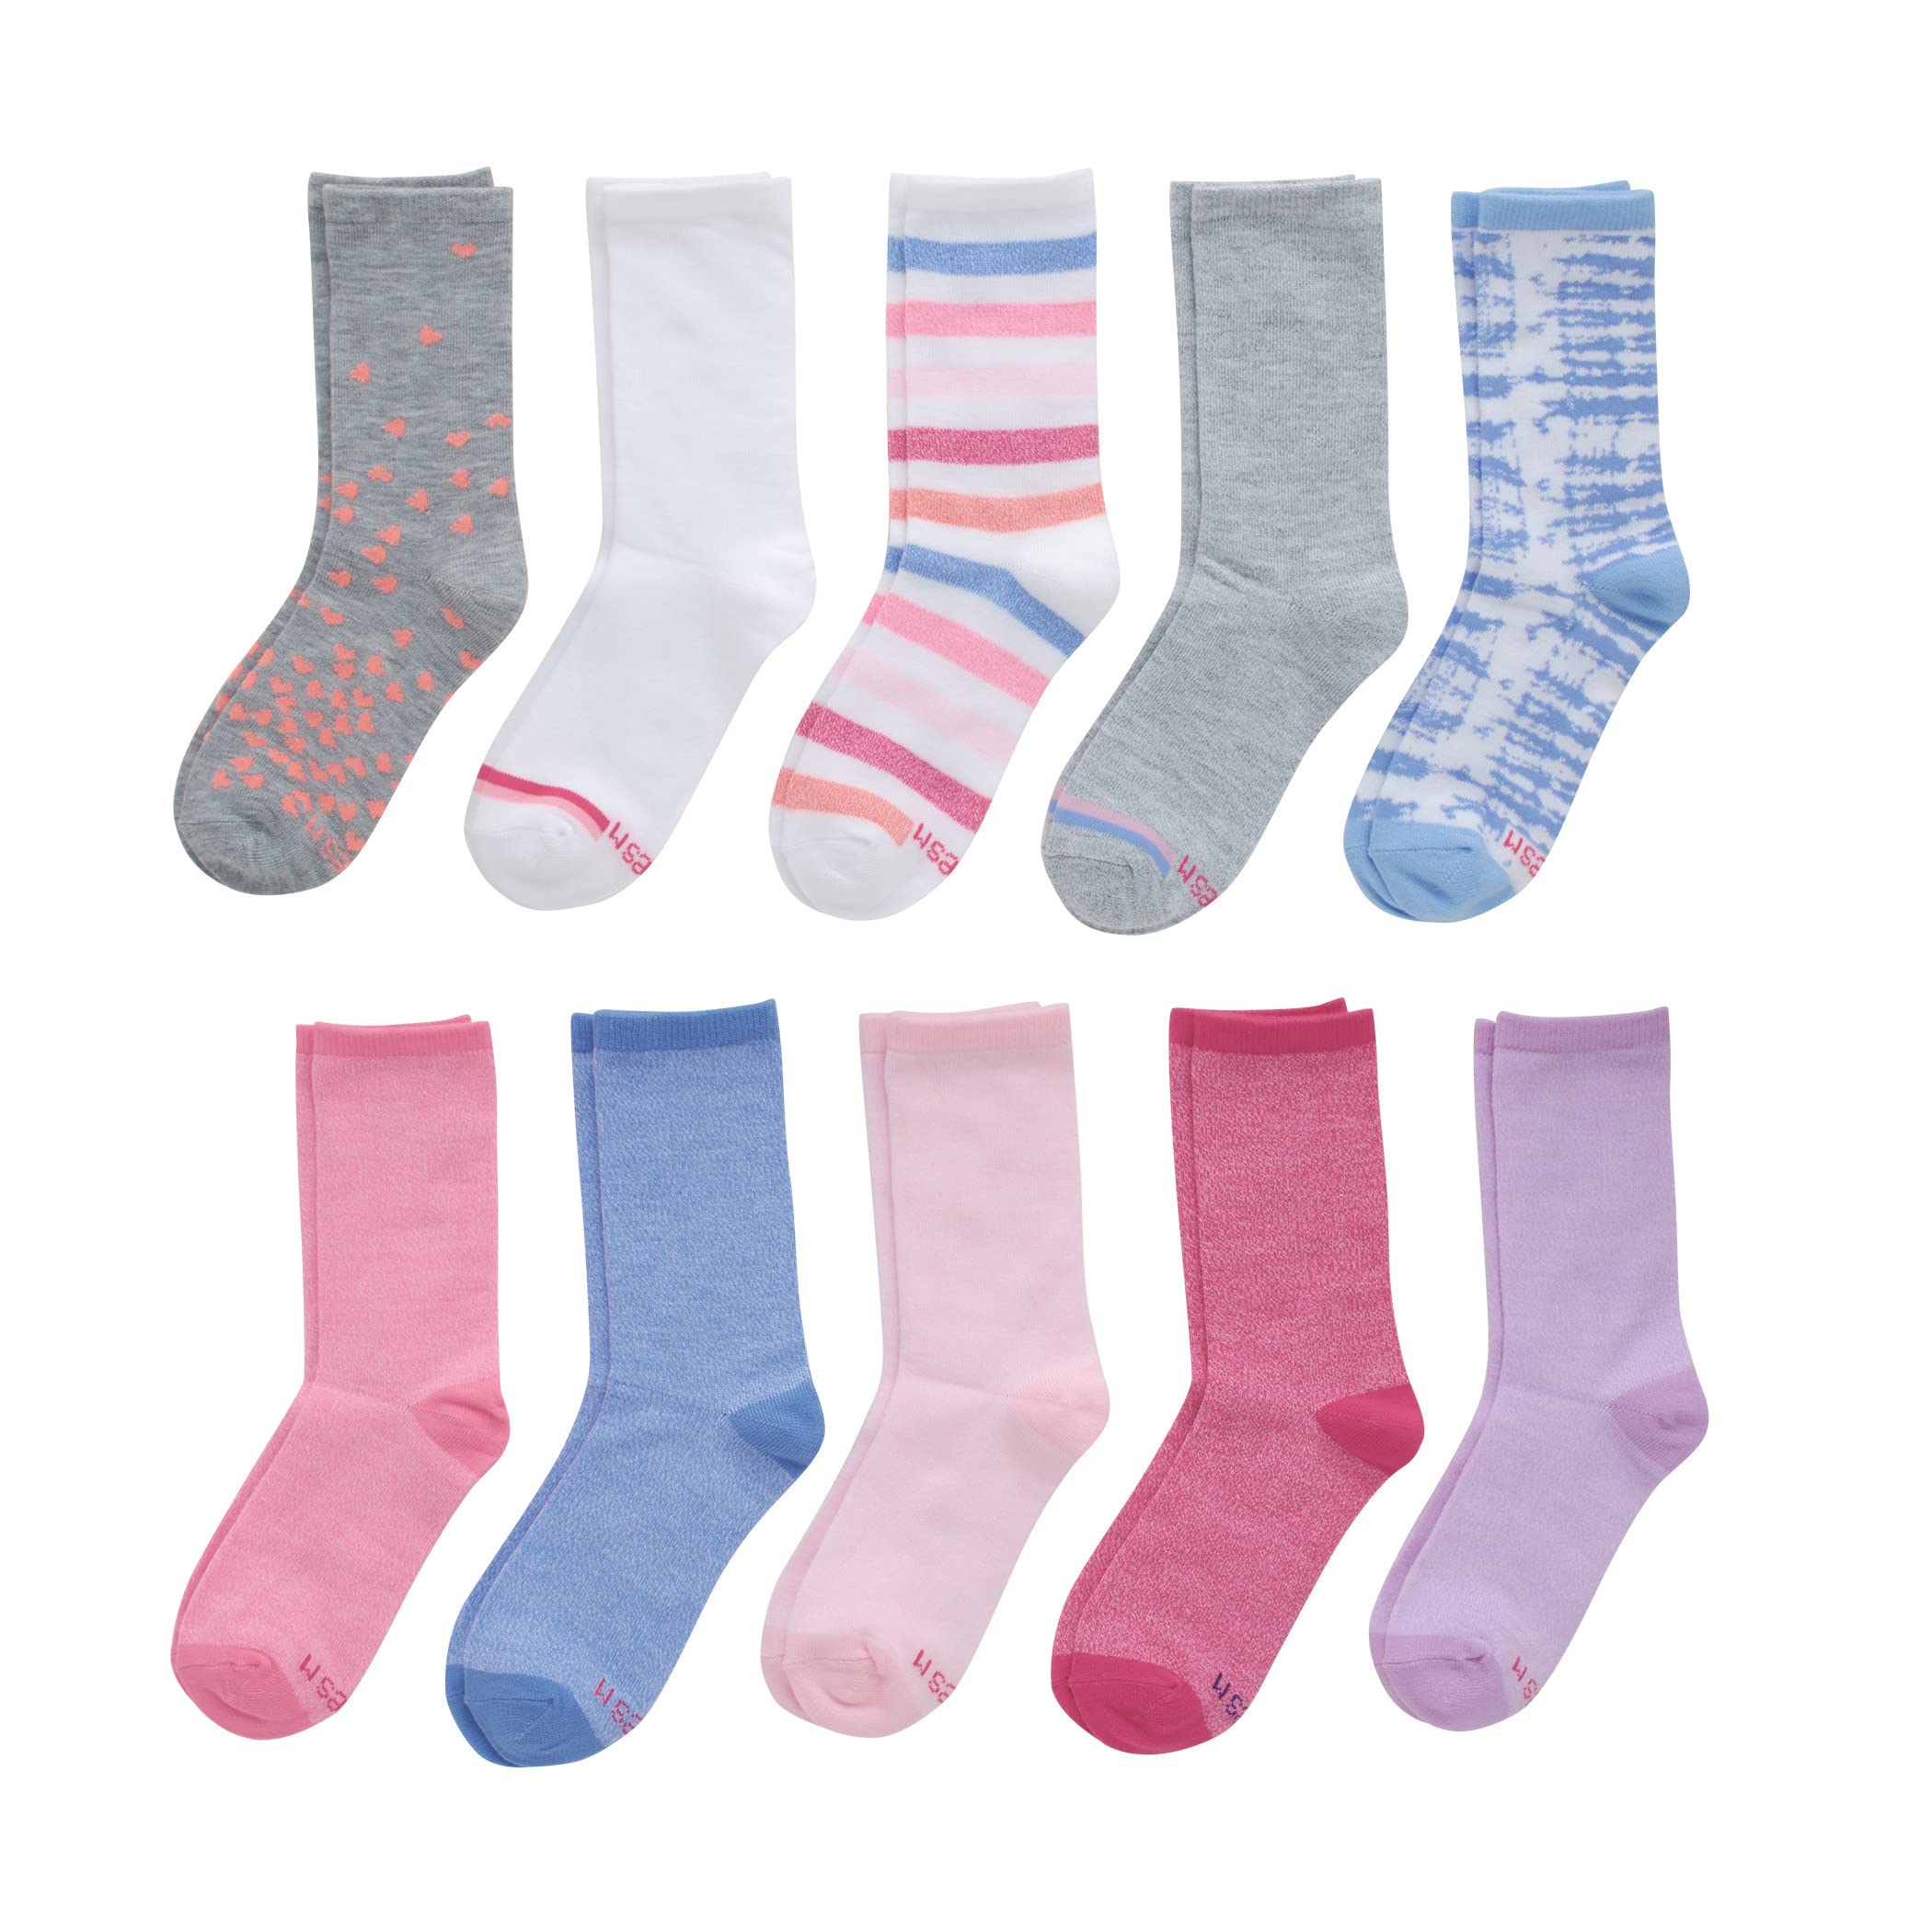 Hanes Girls' Big Ultimate Fashion, Lightweight Stretch Crew Socks, Assorted 10-Pair Pack, Small